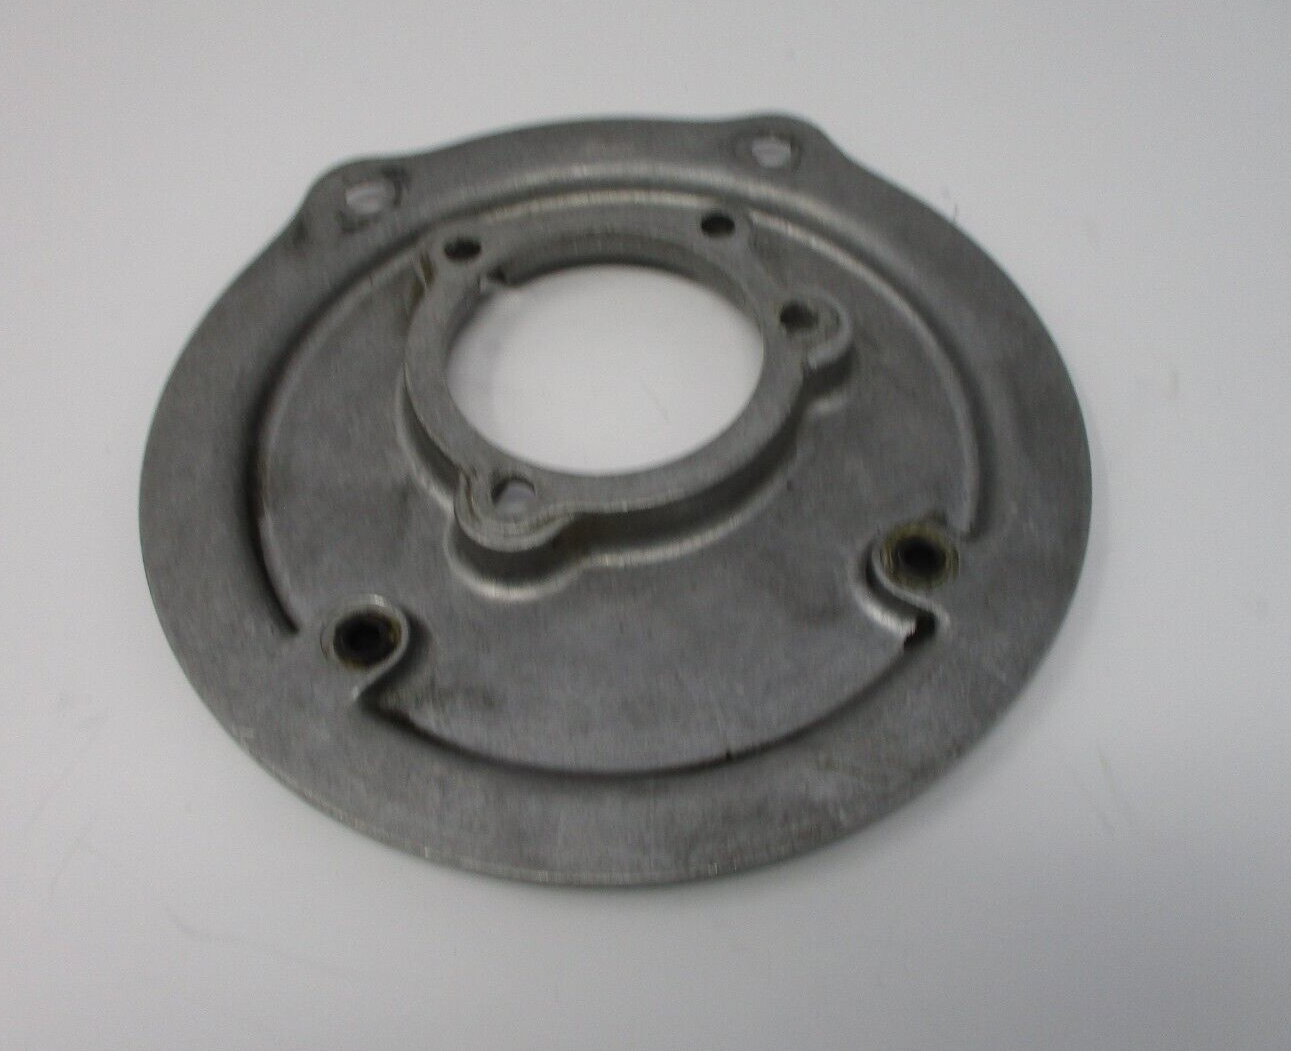 High Flow Air Cleaner Backing Plate for Carb Models